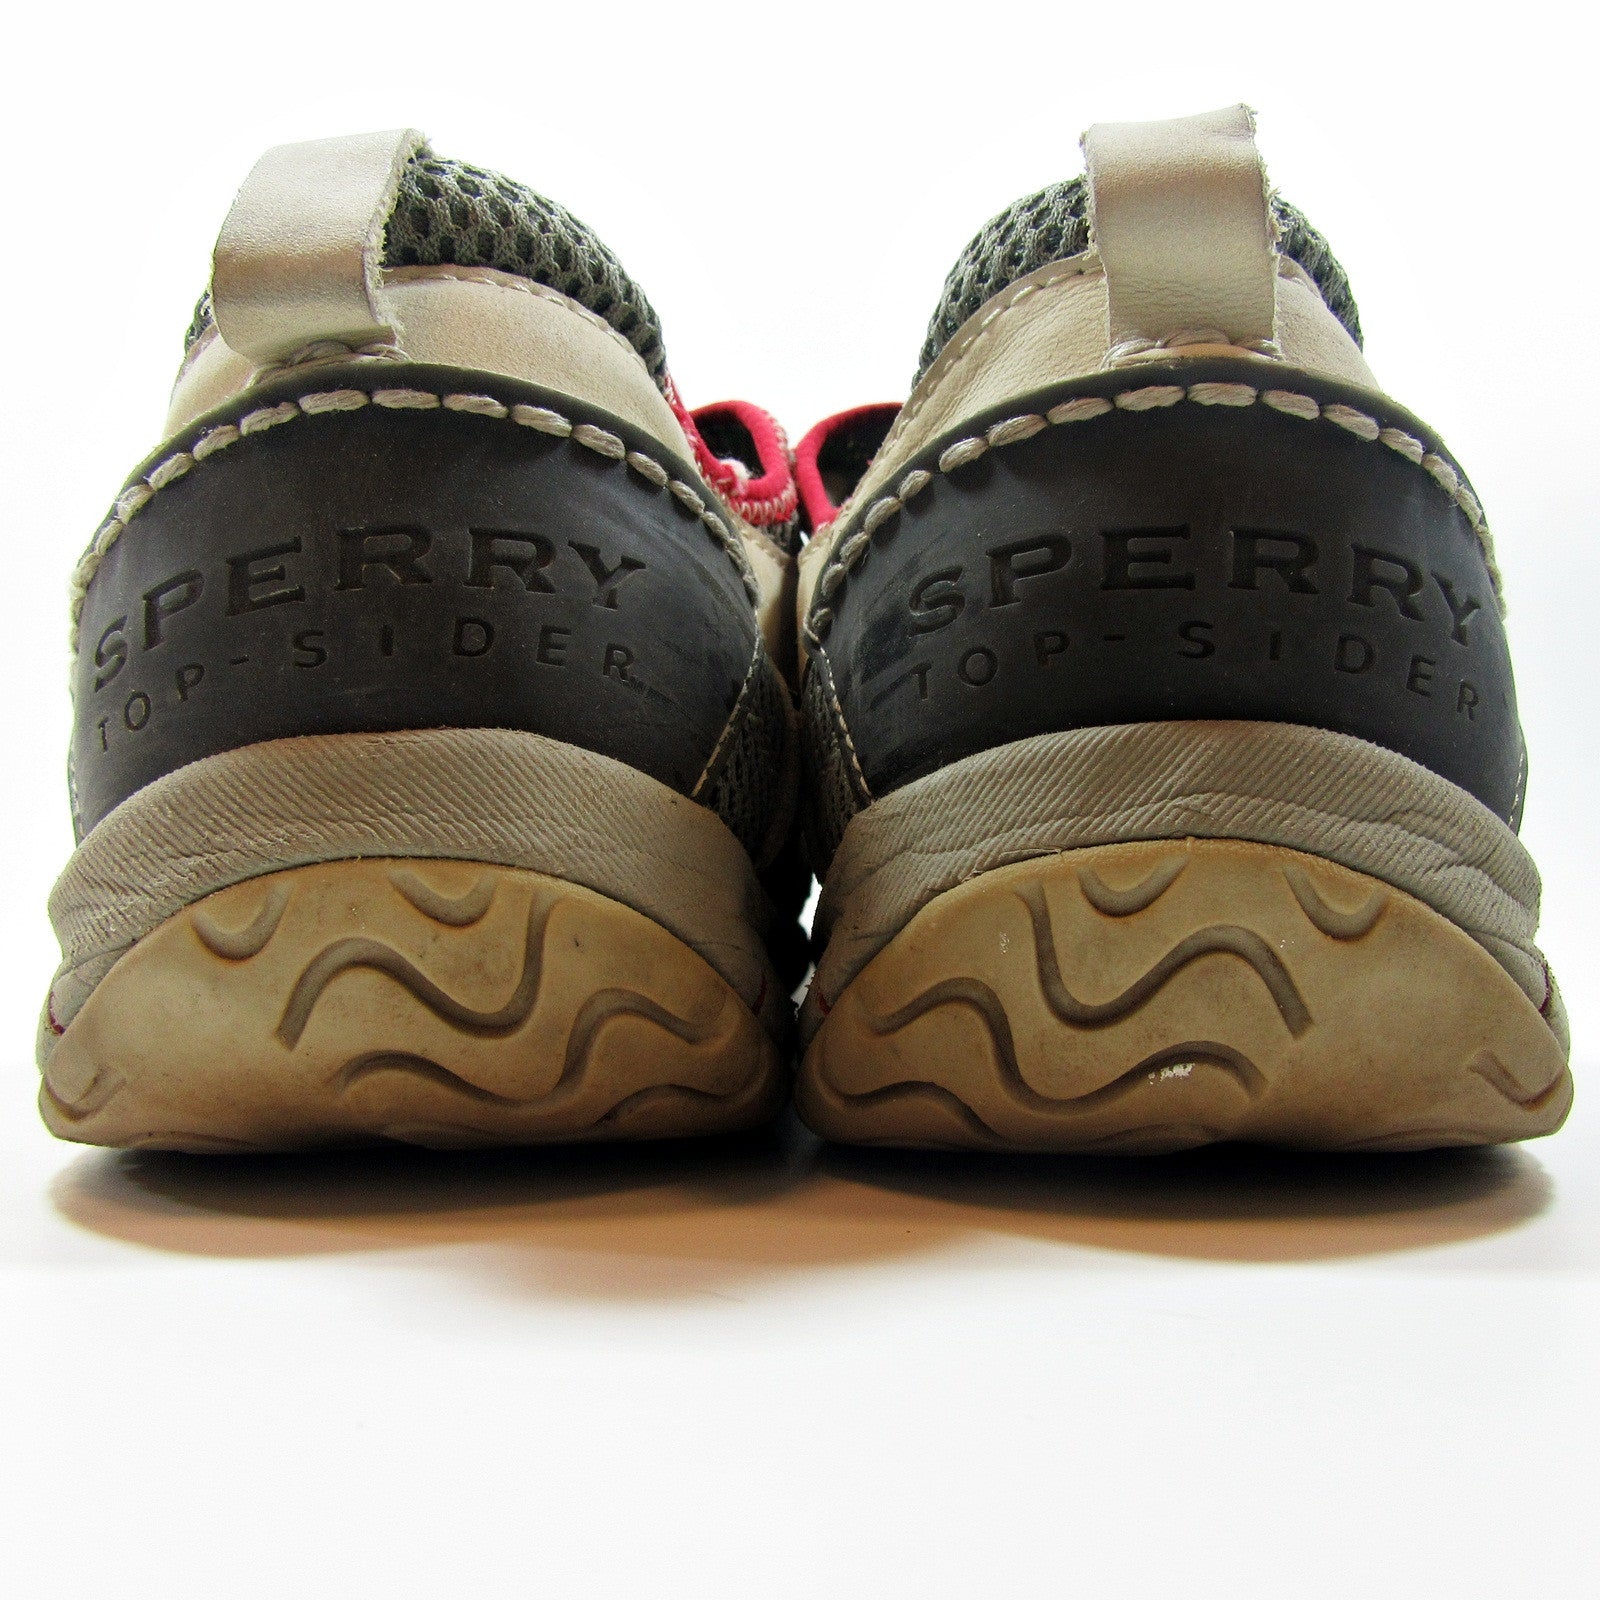 SPERRY - Top Sider